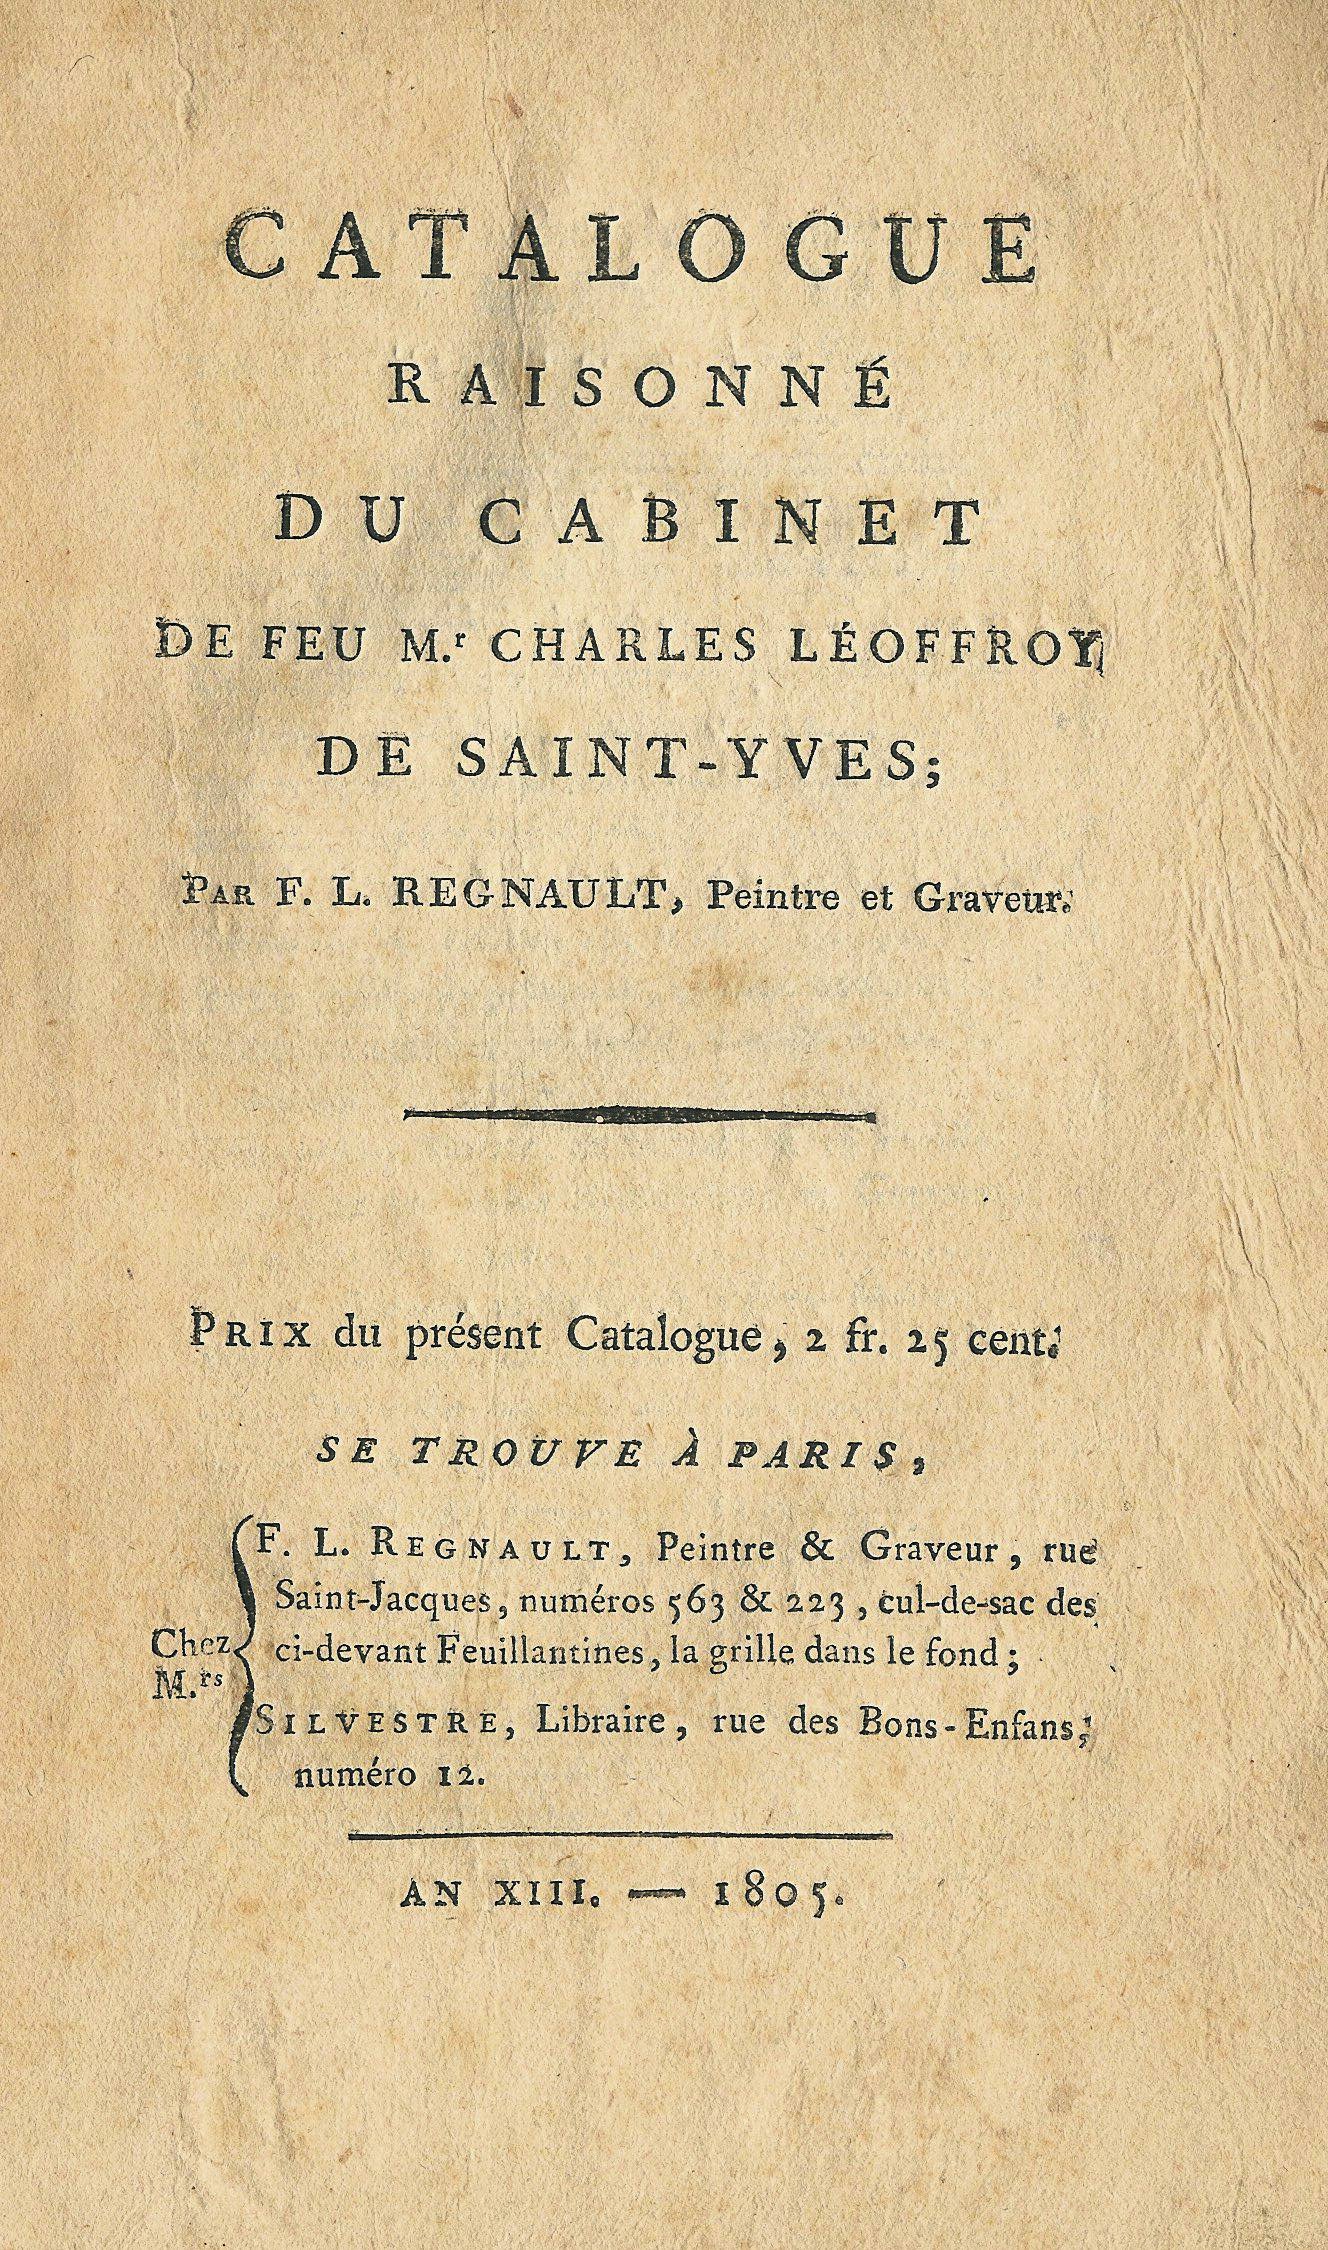 CLSY cabinet enchères 1805